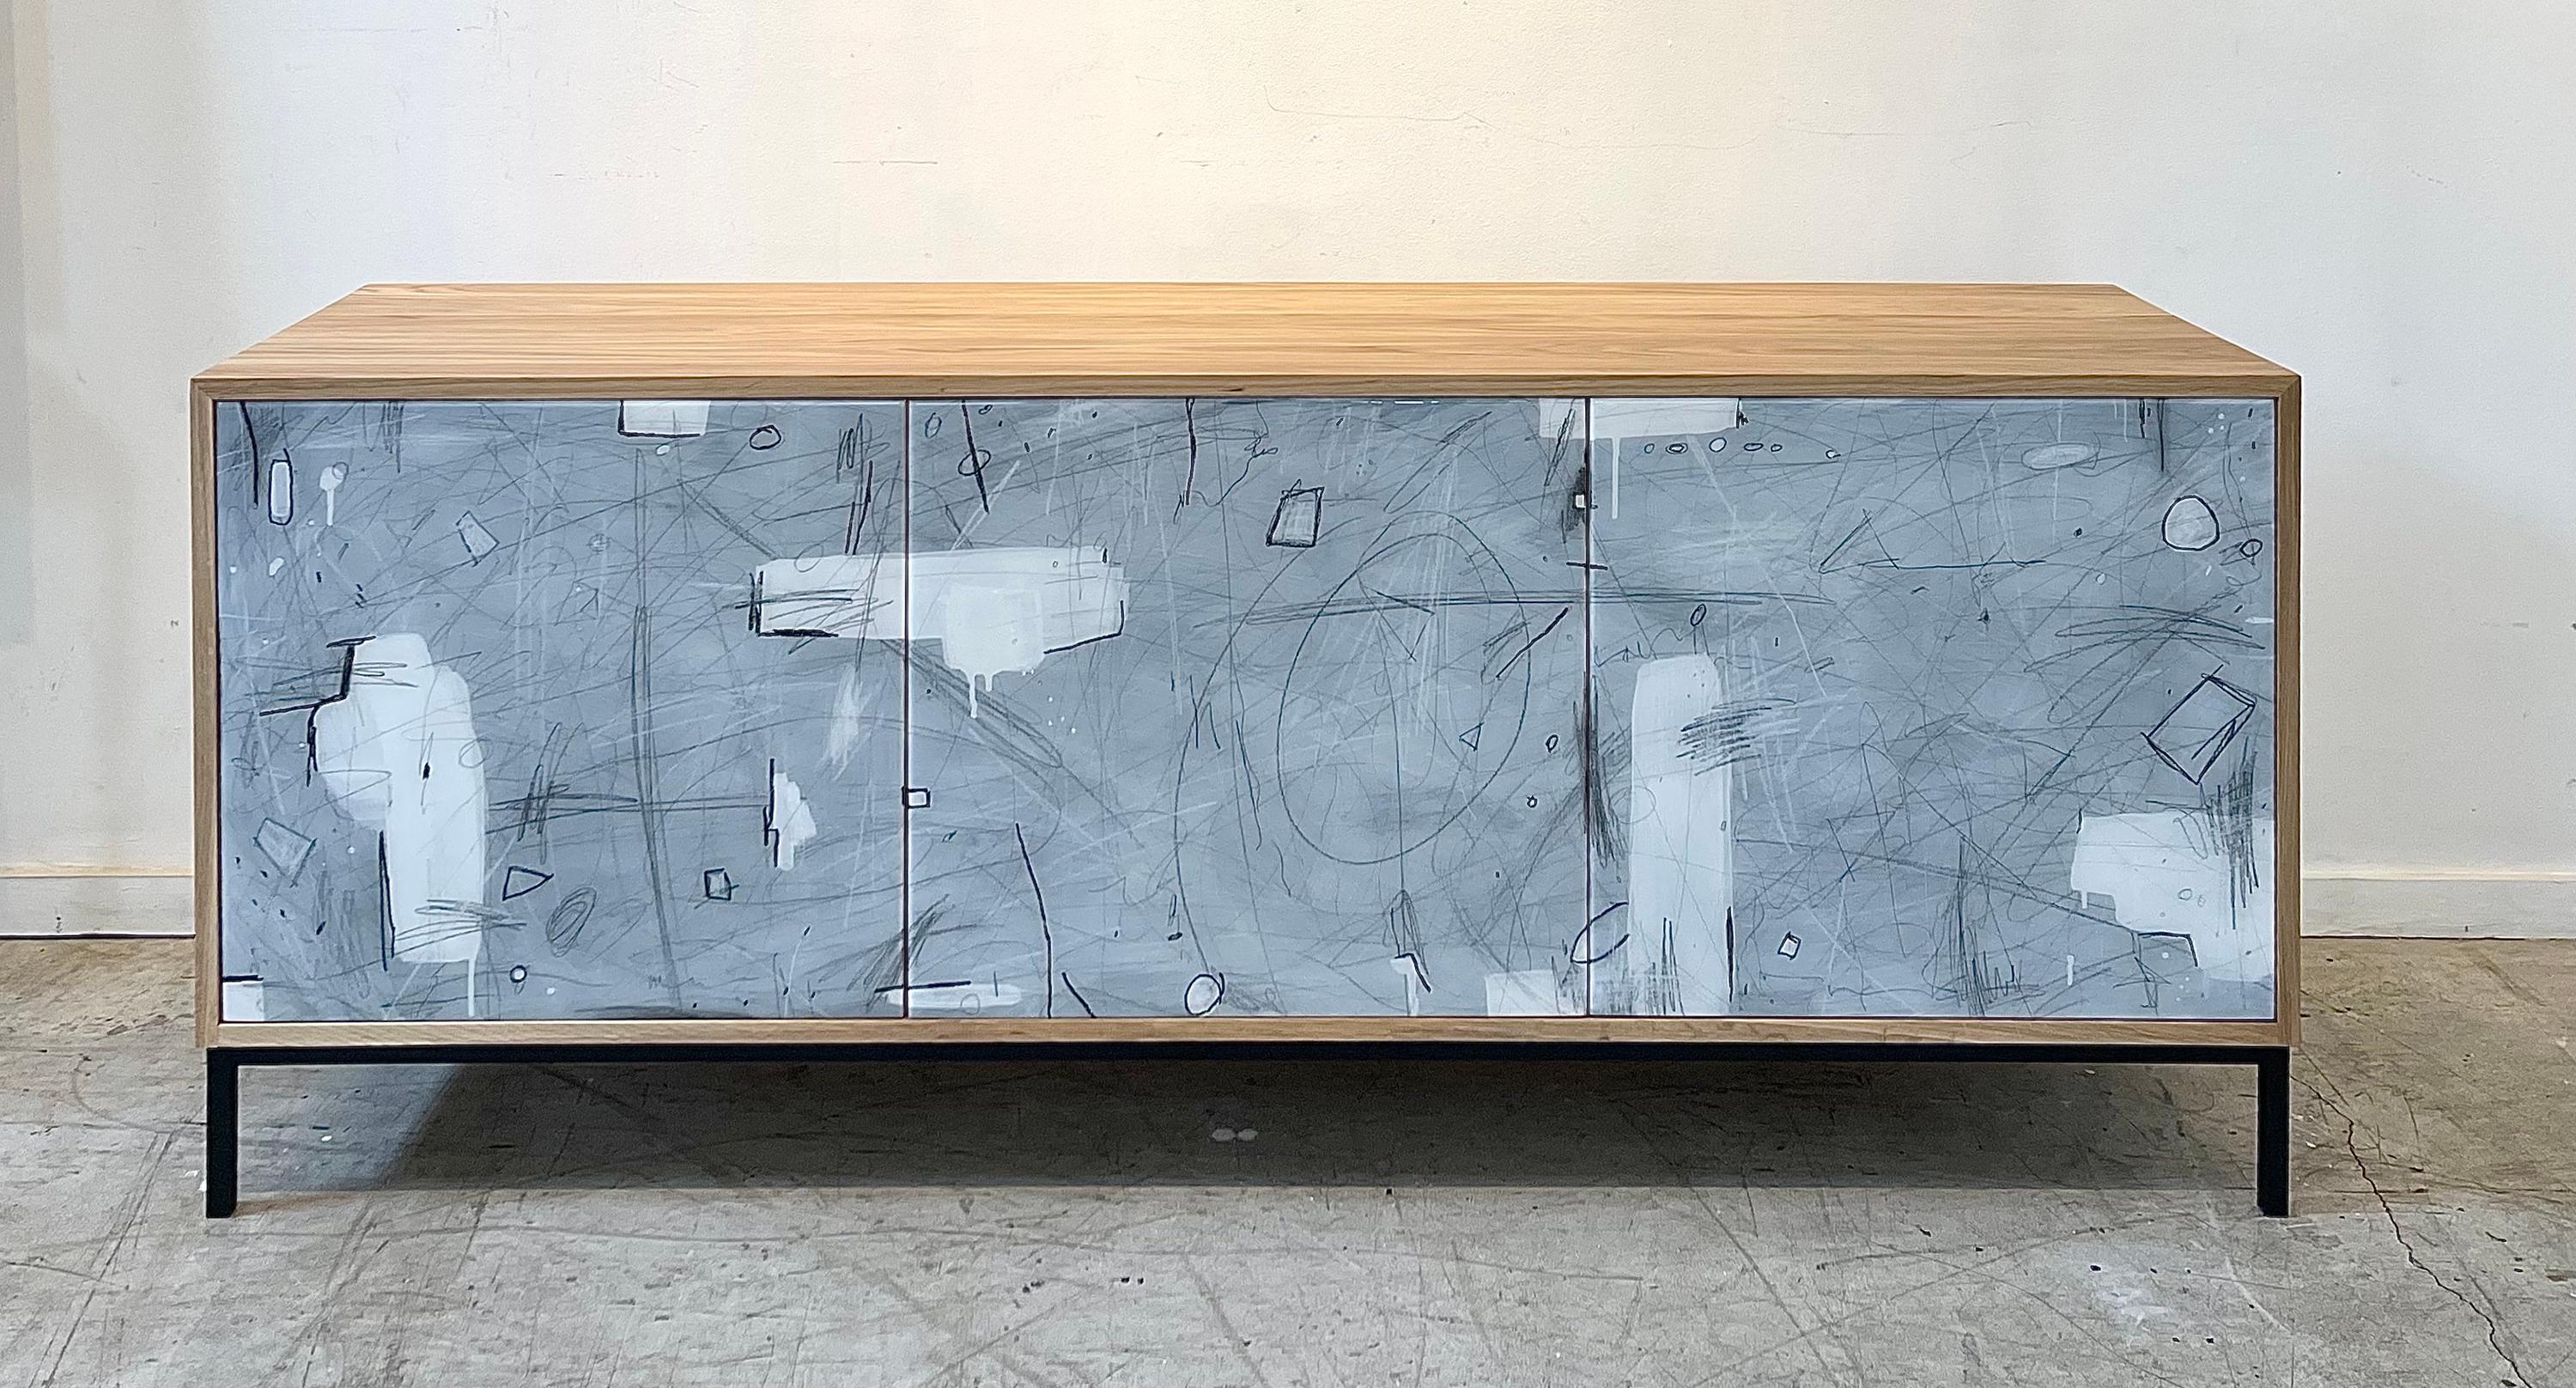 The Abstract in White credenza is created and painted by hand in our Toronto studio.

The artwork is by artist Murray Duncan. 

Based on an abstract interpretation of graffiti and freely-scribed, calligraphic working with solid fields and shape in